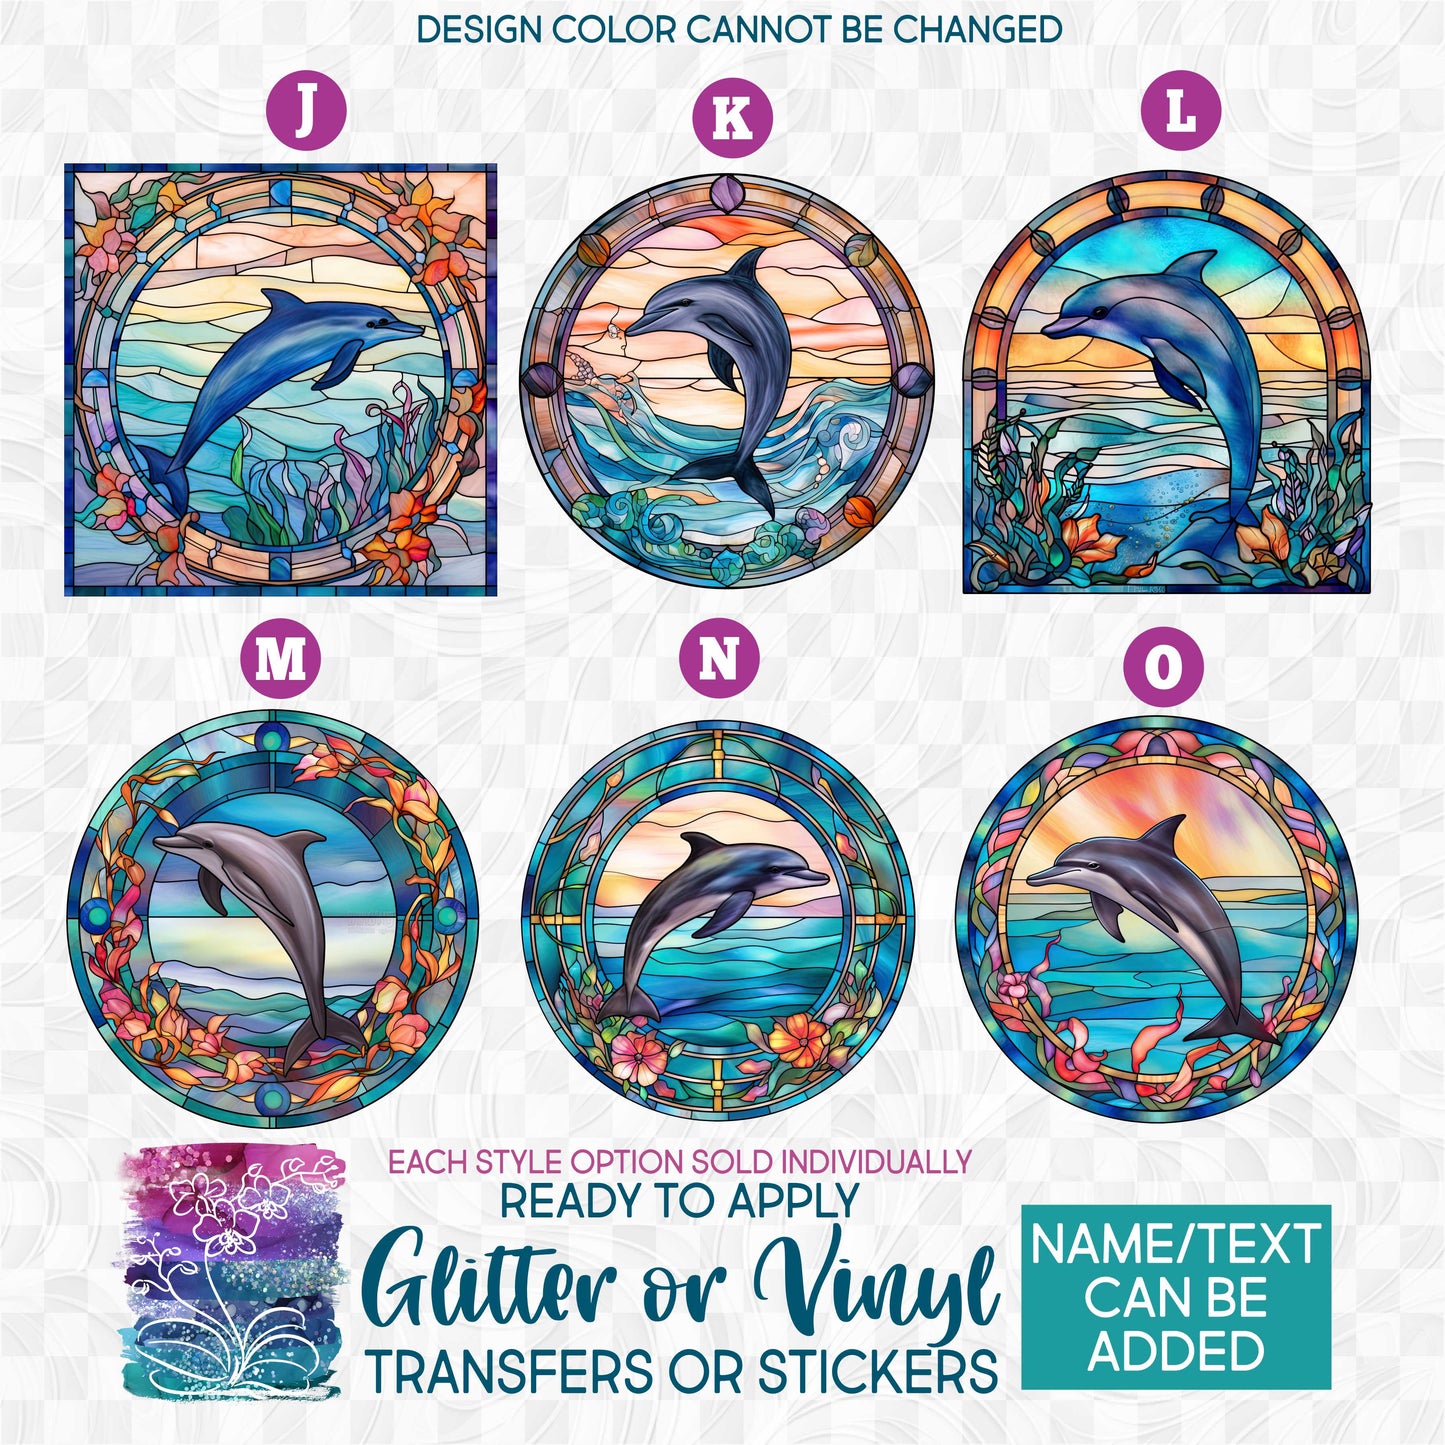 (s150-13) Stained-Glass Dolphin e Glitter or Vinyl Iron-On Transfer or Sticker